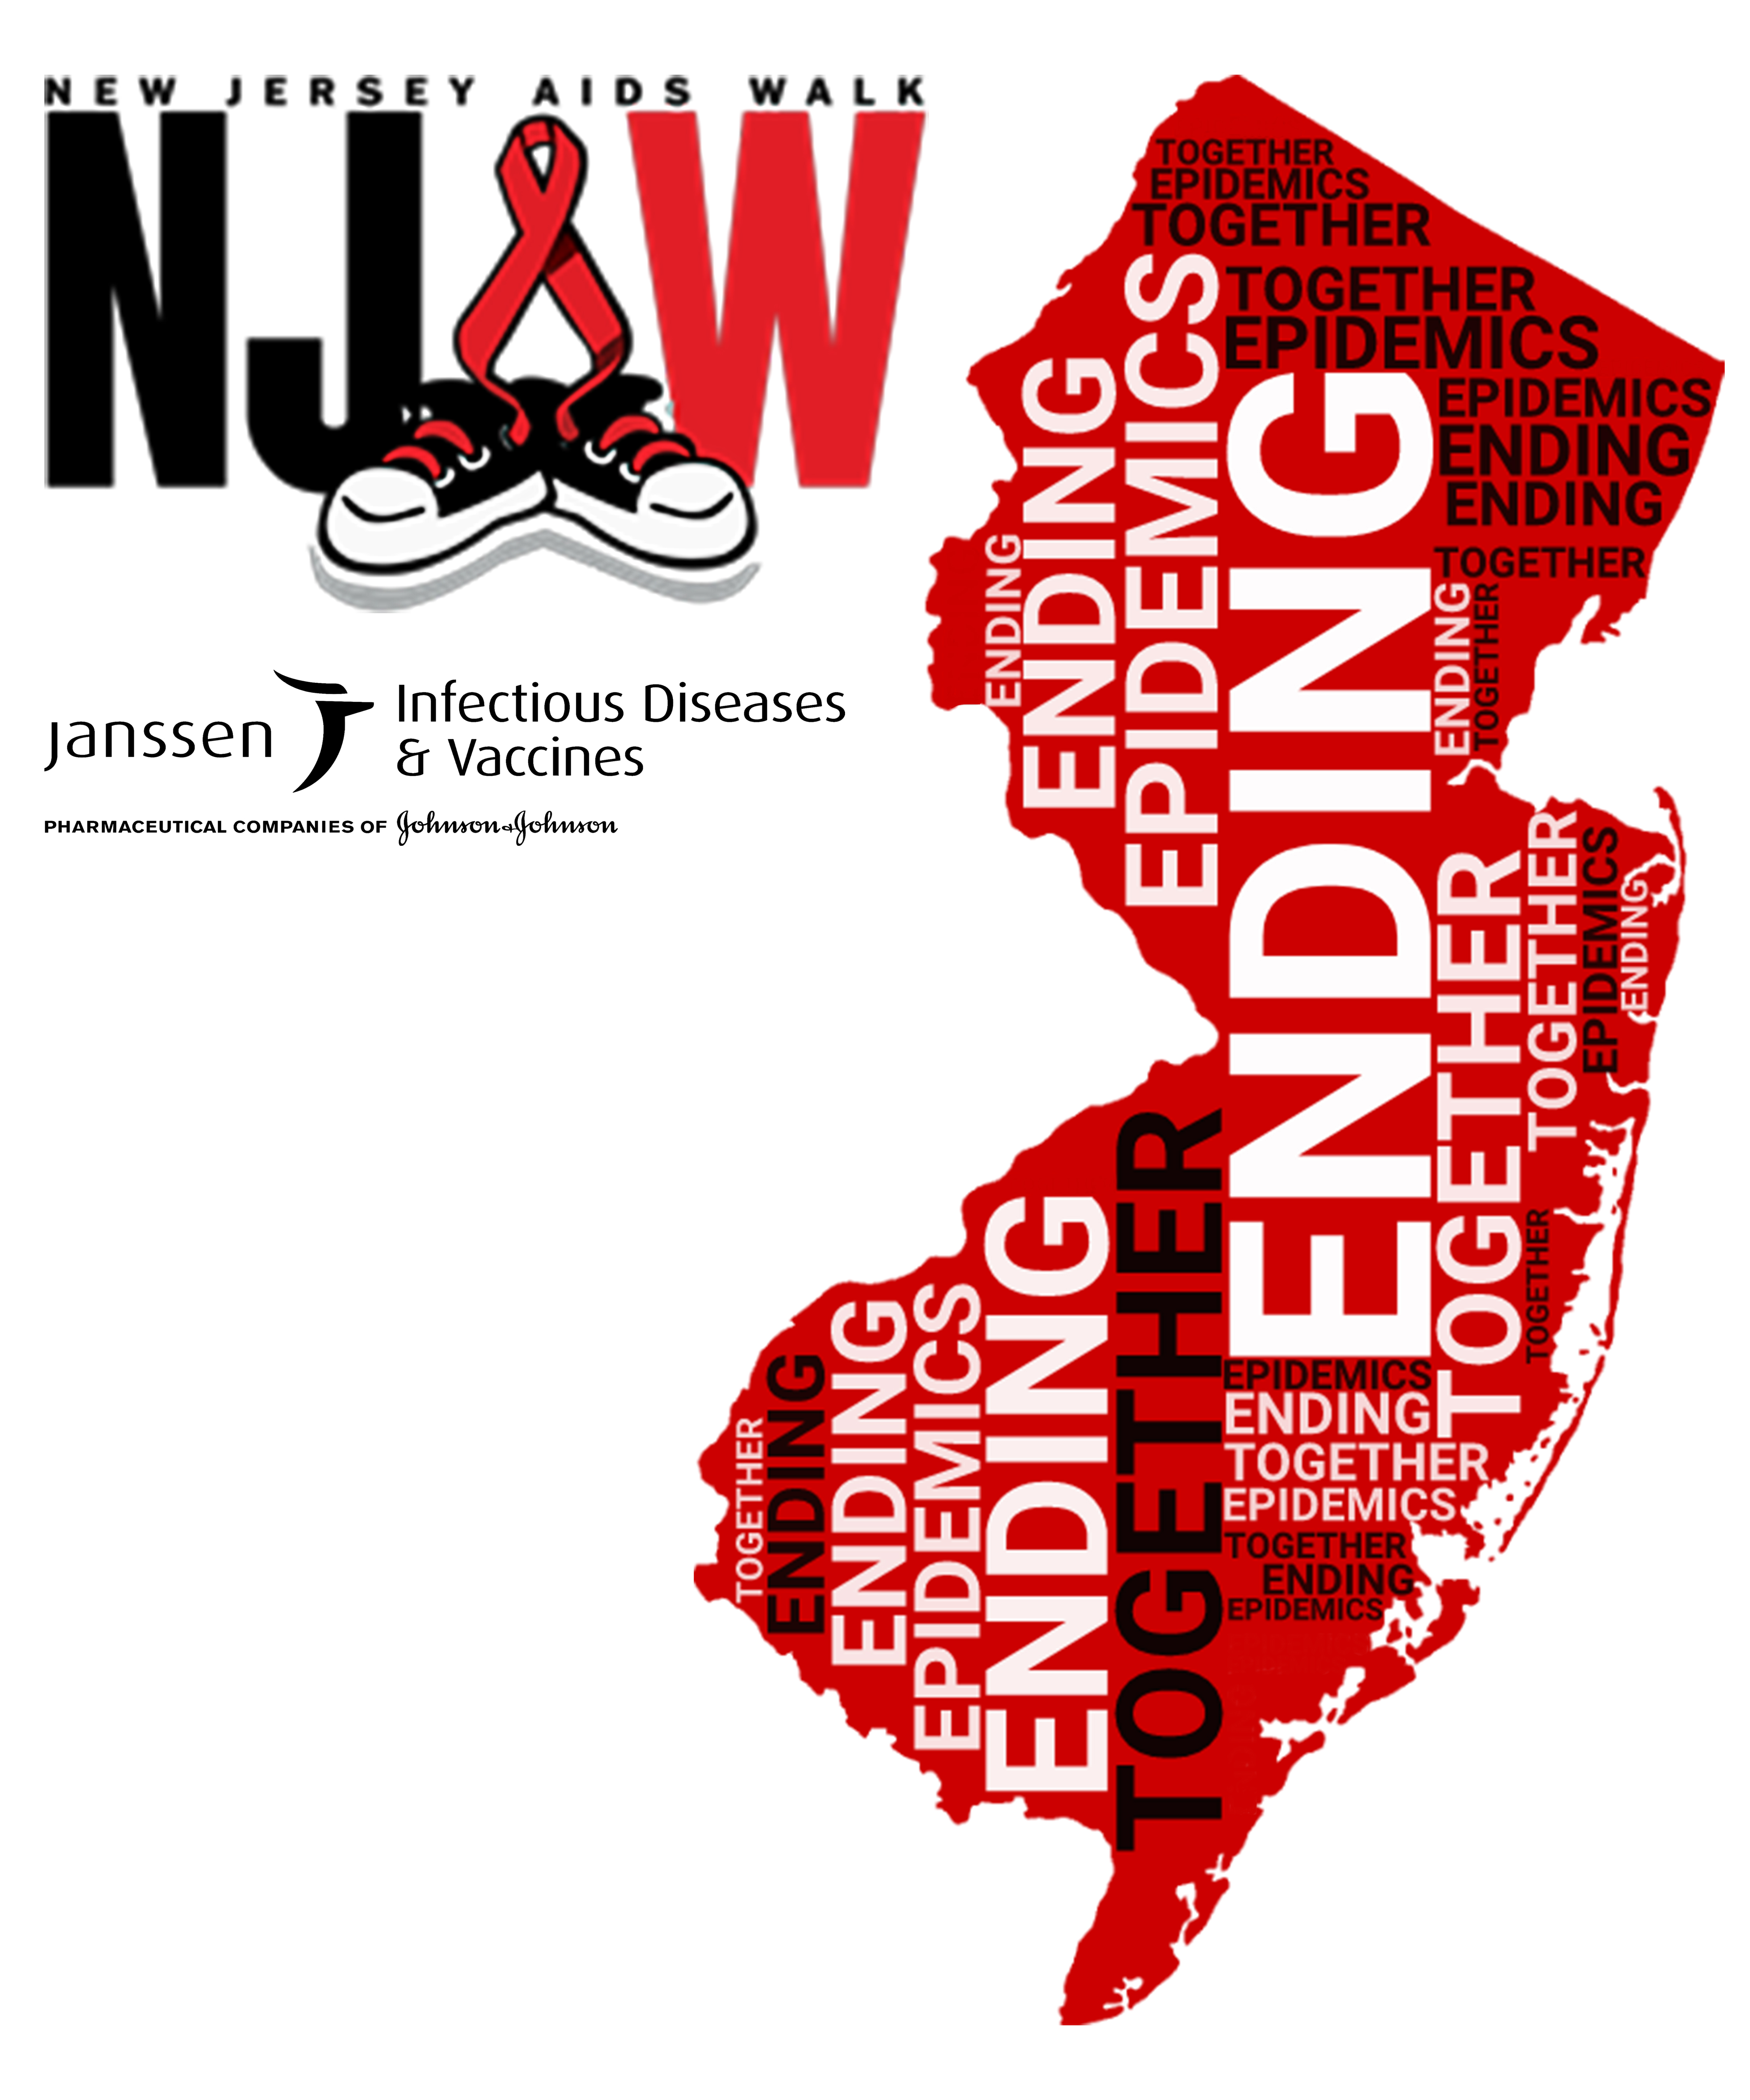 Collaboratively crafted t-shirt logo for the 2023 New Jersey AIDS Walk, in conjunction with "Out in Jersey."